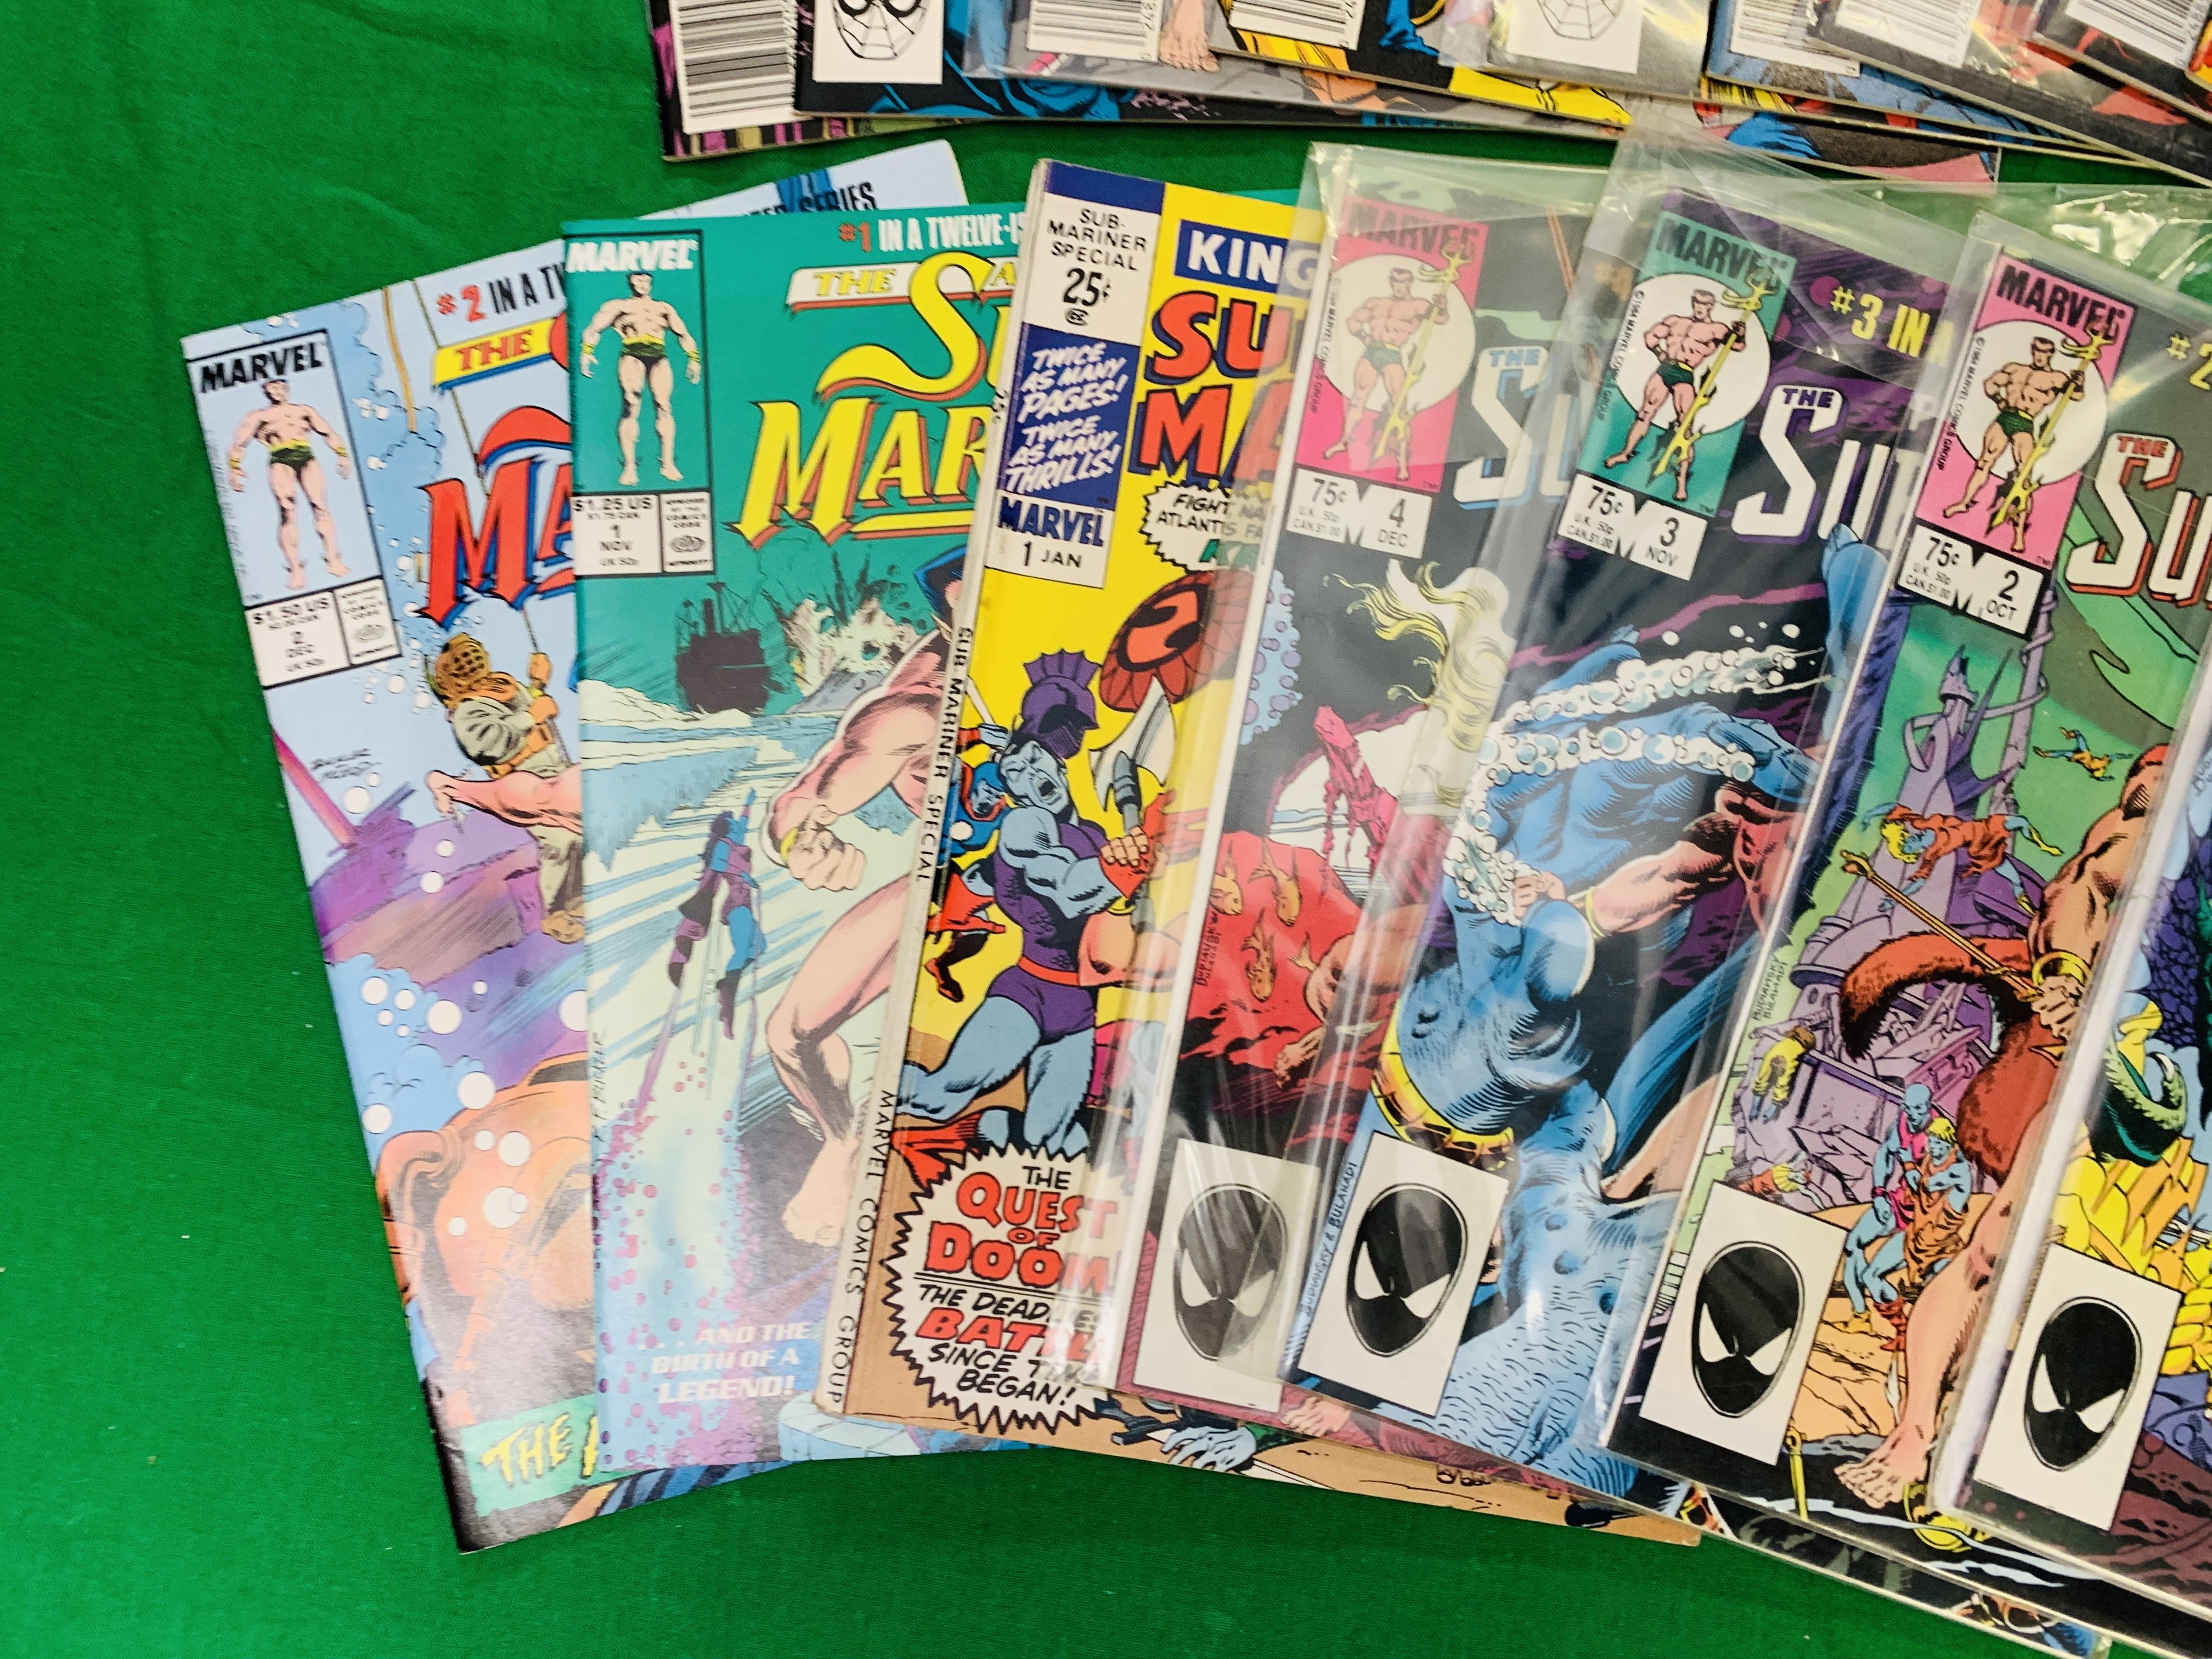 MARVEL COMICS THE SUBMARINER LIMITED SERIES NO. 1 - 4 FROM 1984. NO. 1 - 12 FROM 1988, NO. - Image 3 of 5